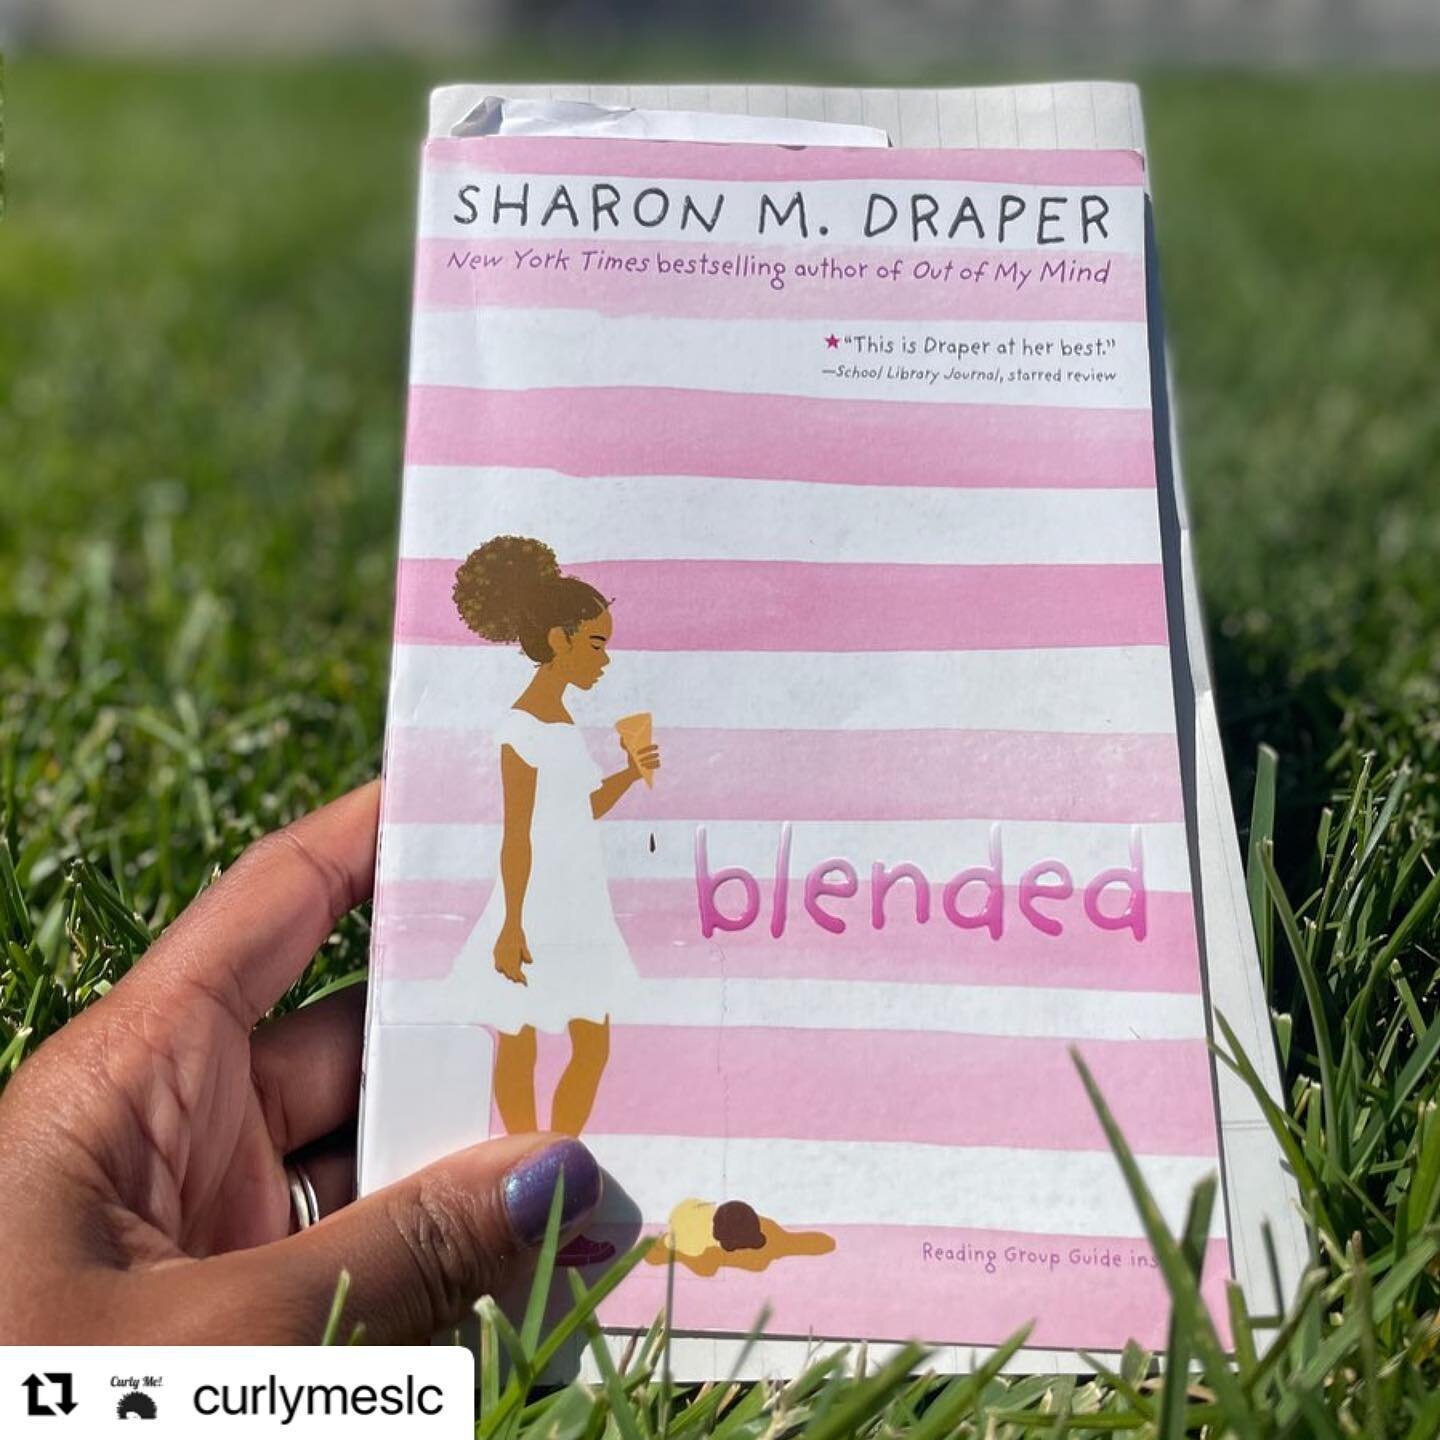 Happy Reading! 💕 #Repost @curlymeslc with @make_repost
・・・
We are 4 DAYS AWAY from our 1st meeting of our book club. @sharonmdraper book #Blended is the book our girls will read this summer and we are excited about it! With over 10 girls signed up f